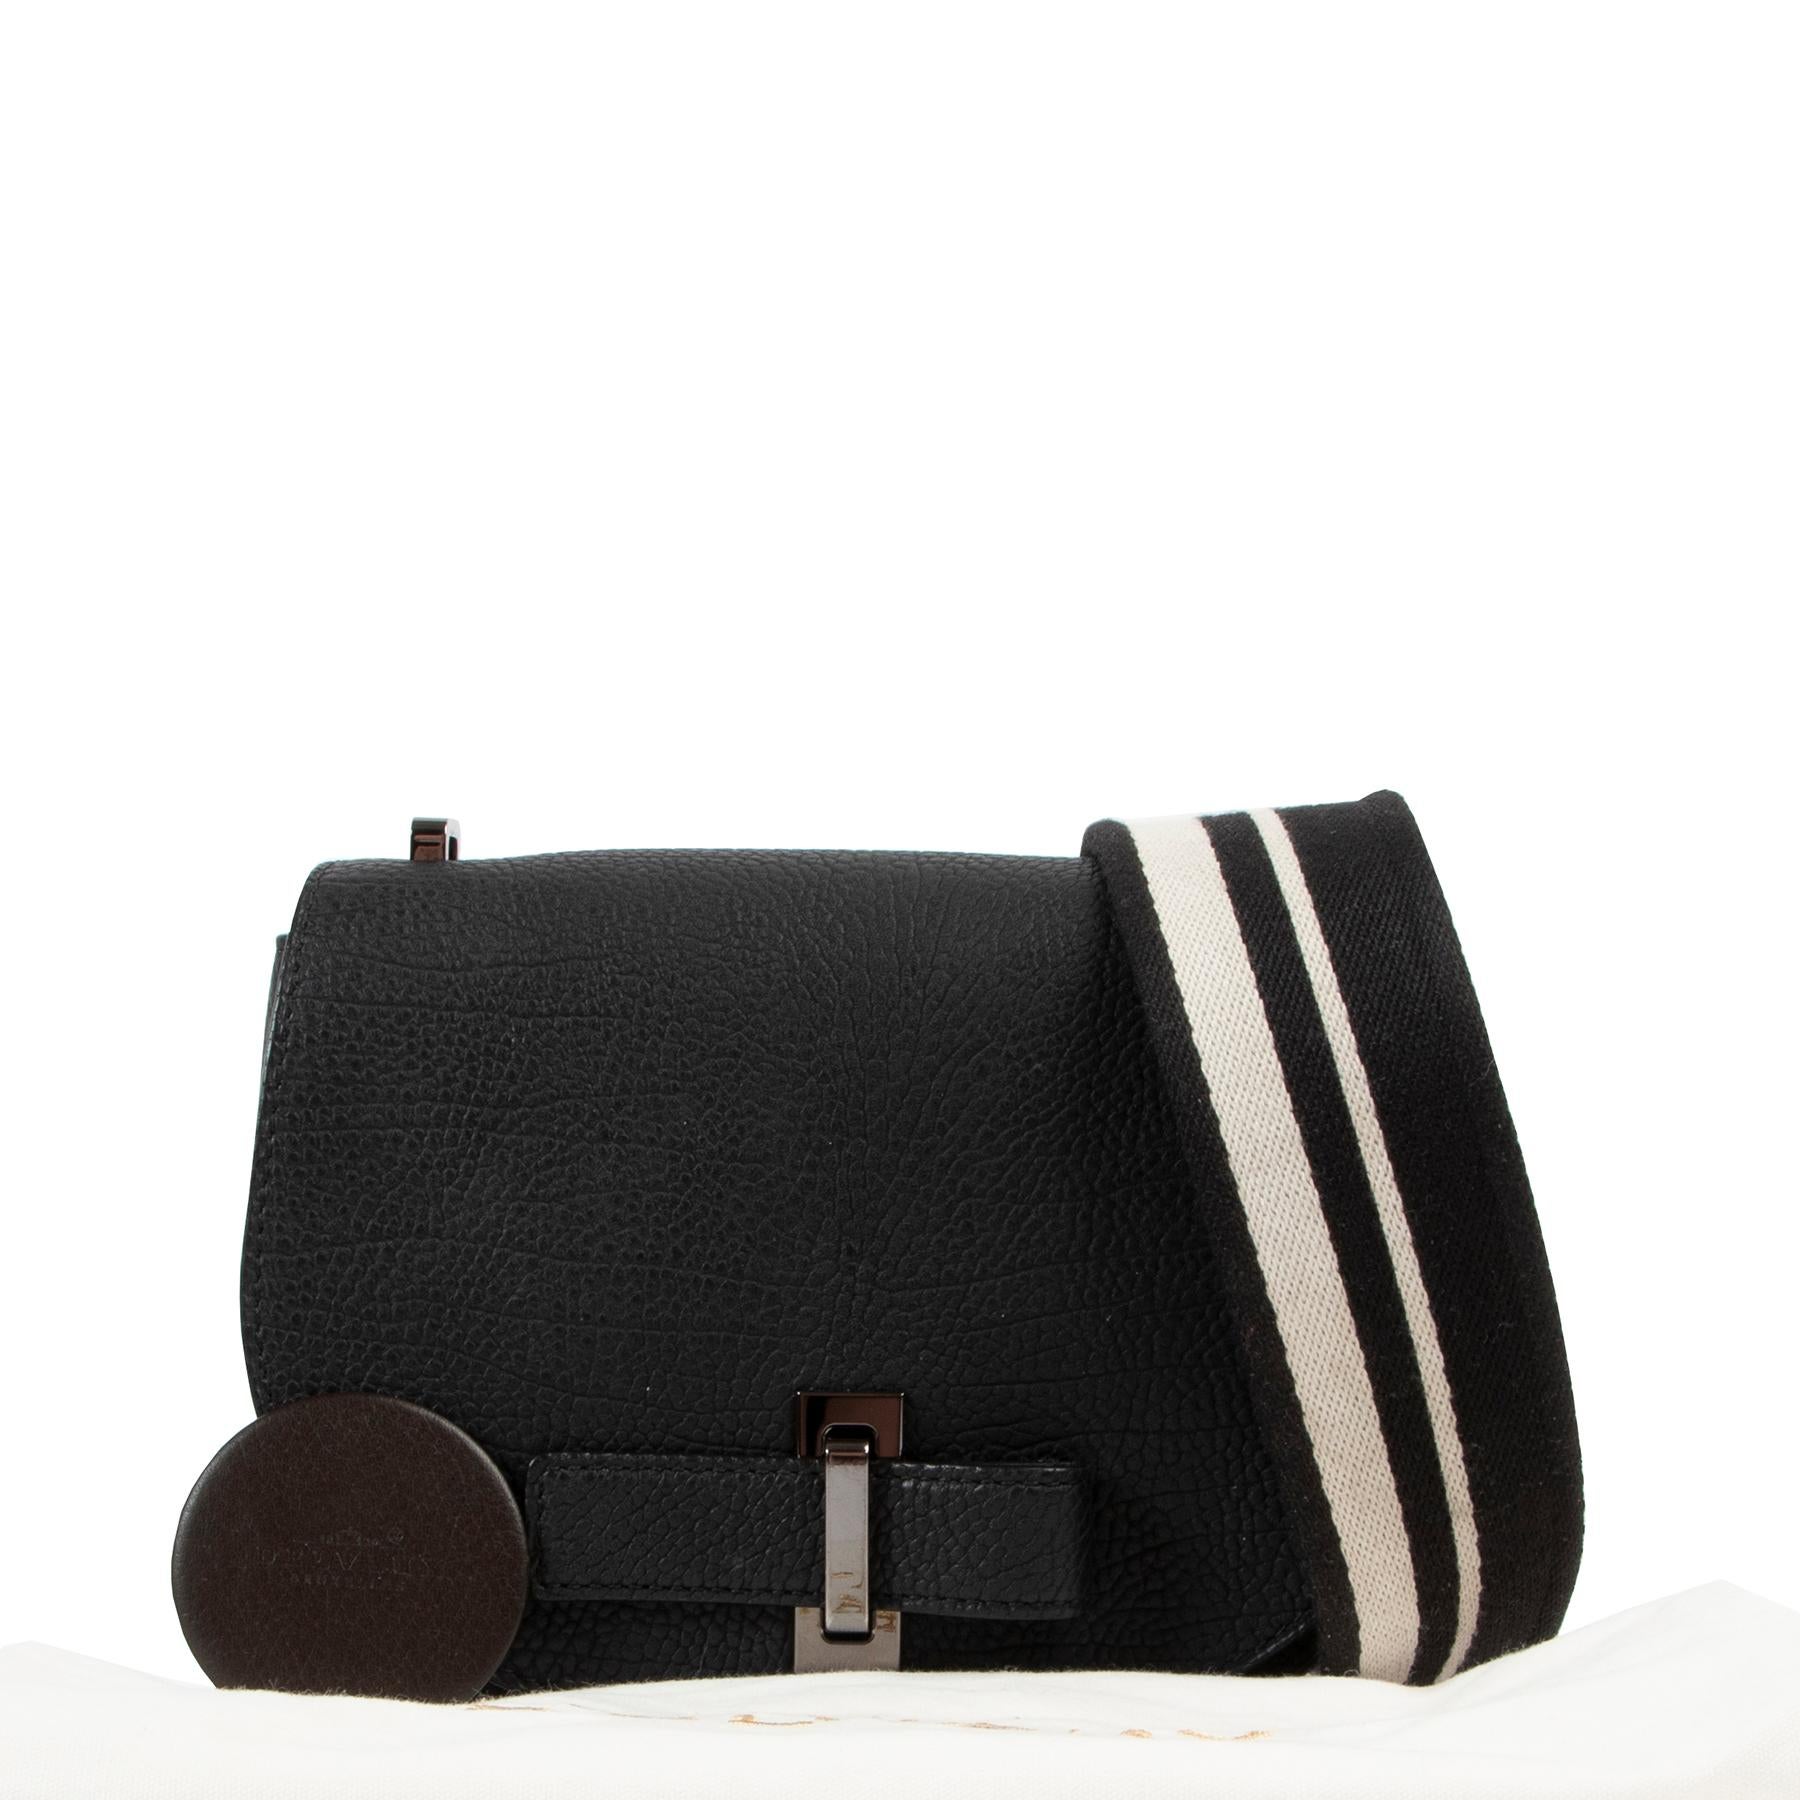 Delvaux Le Mutin Mini Crispy Calf Black Crossbody

Watch this stunning Le Mutin Mini combine sporty vibes and sheer elegance in an effortless way! The crispy calf leather in black with contrasting white details and a wide canvas strap make this a